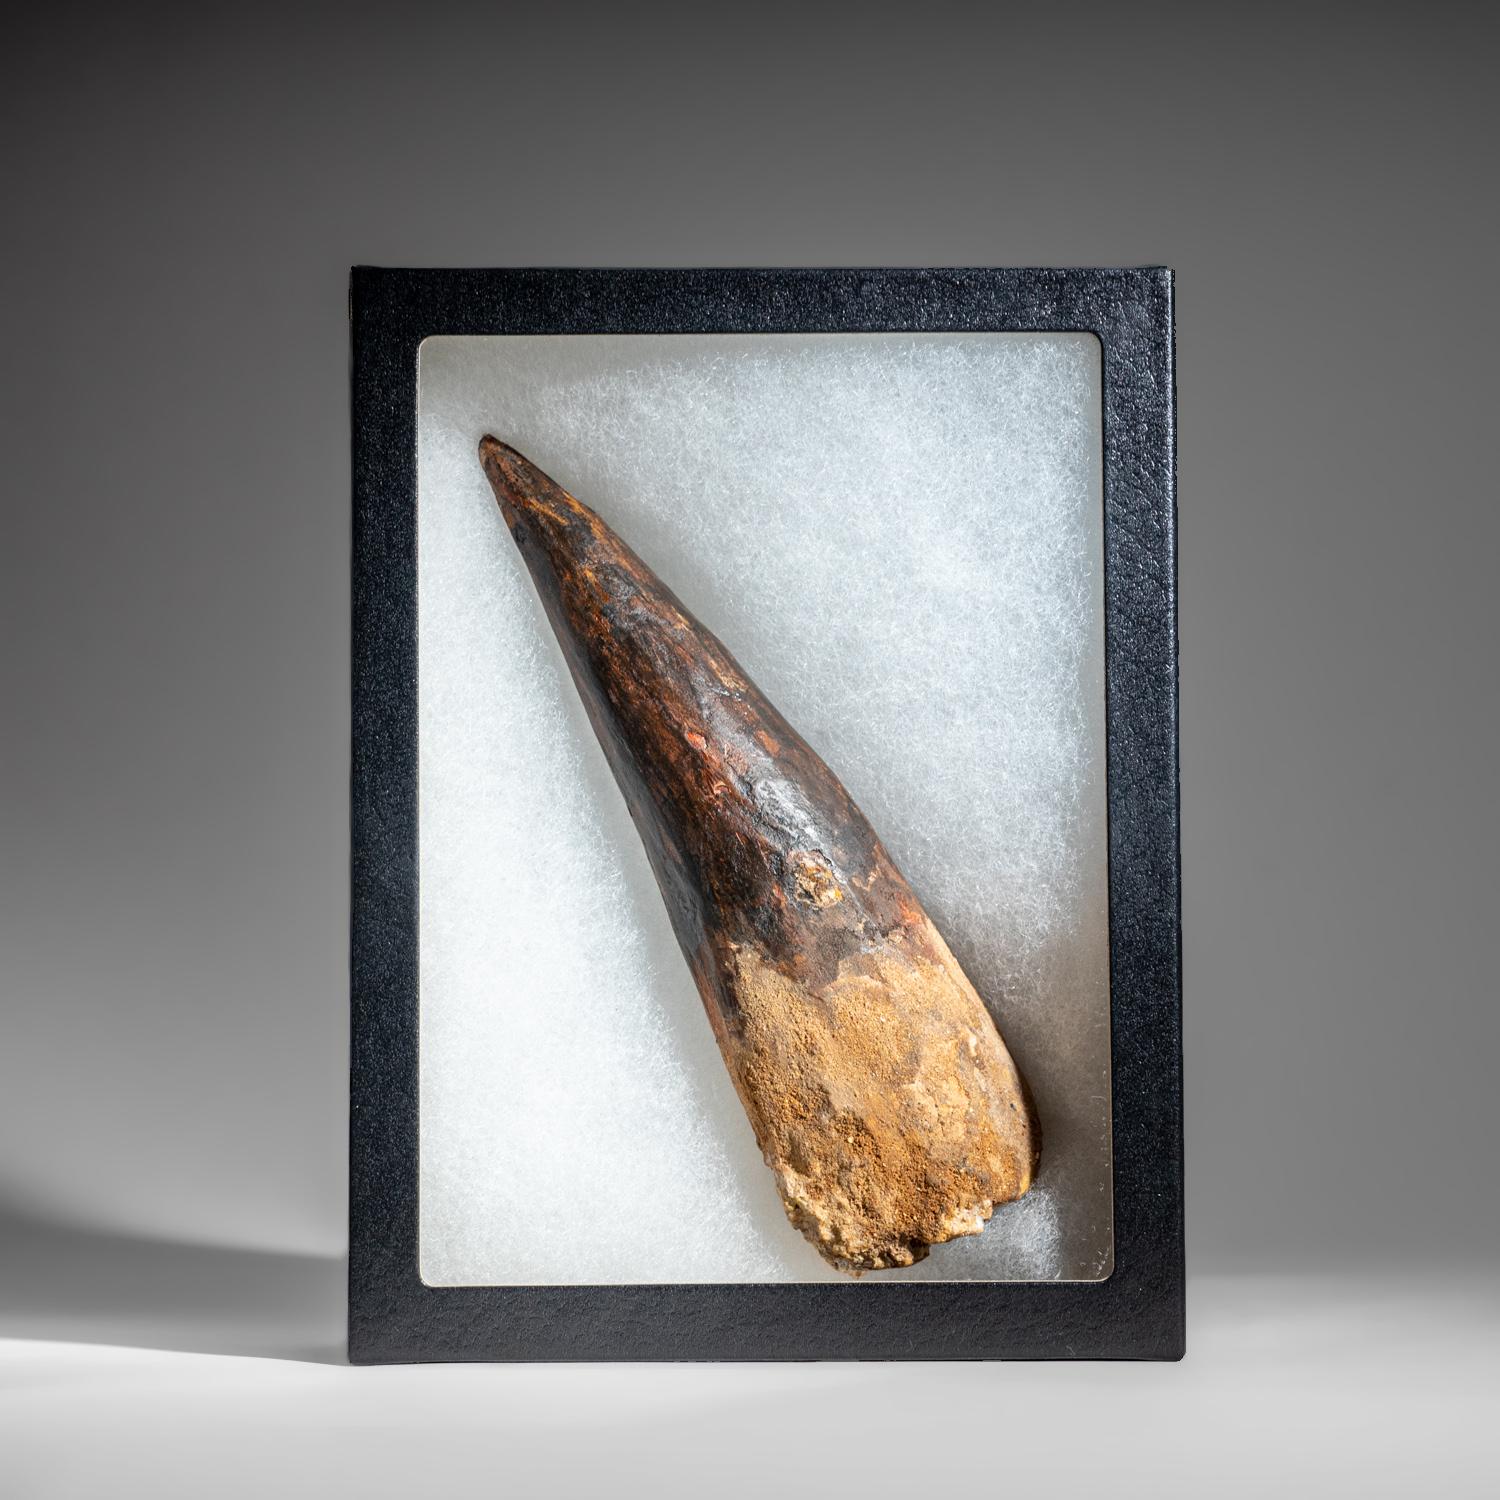 This huge, Museum-quality Spinosaur tooth is completely in tact with no repairs. This incredible specimen includes a display box for preservation and display purposes. Spinosaurus (meaning 